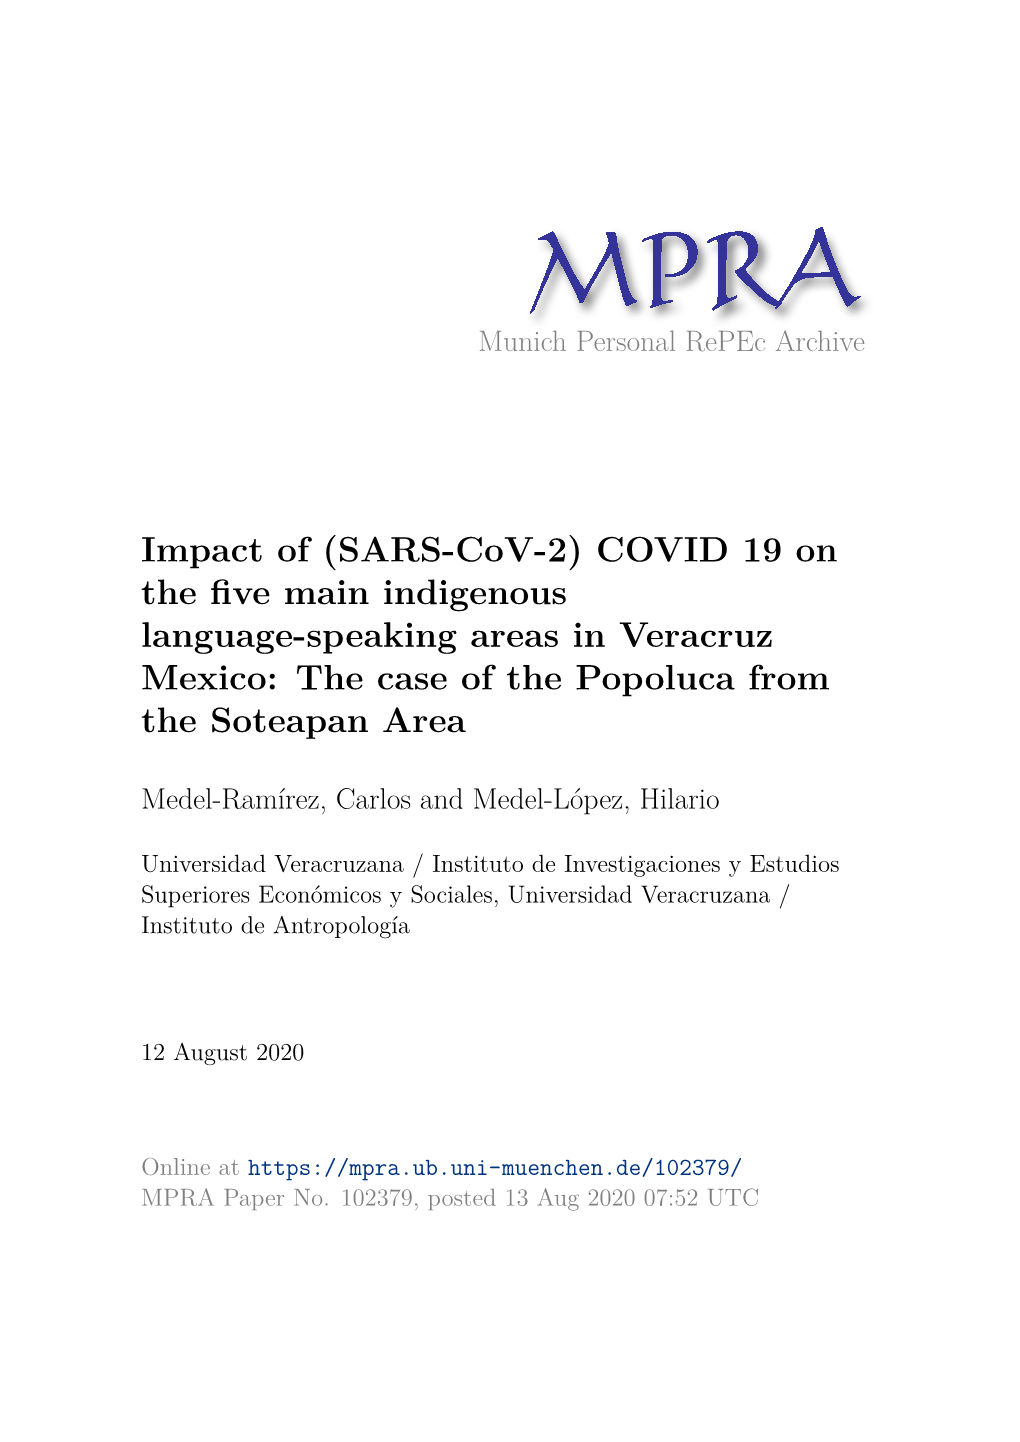 Impact of (SARS-Cov-2) COVID 19 on the Five Main Indigenous Language- Speaking Areas in Veracruz Mexico: the Case of the Popoluca from the Soteapan Area